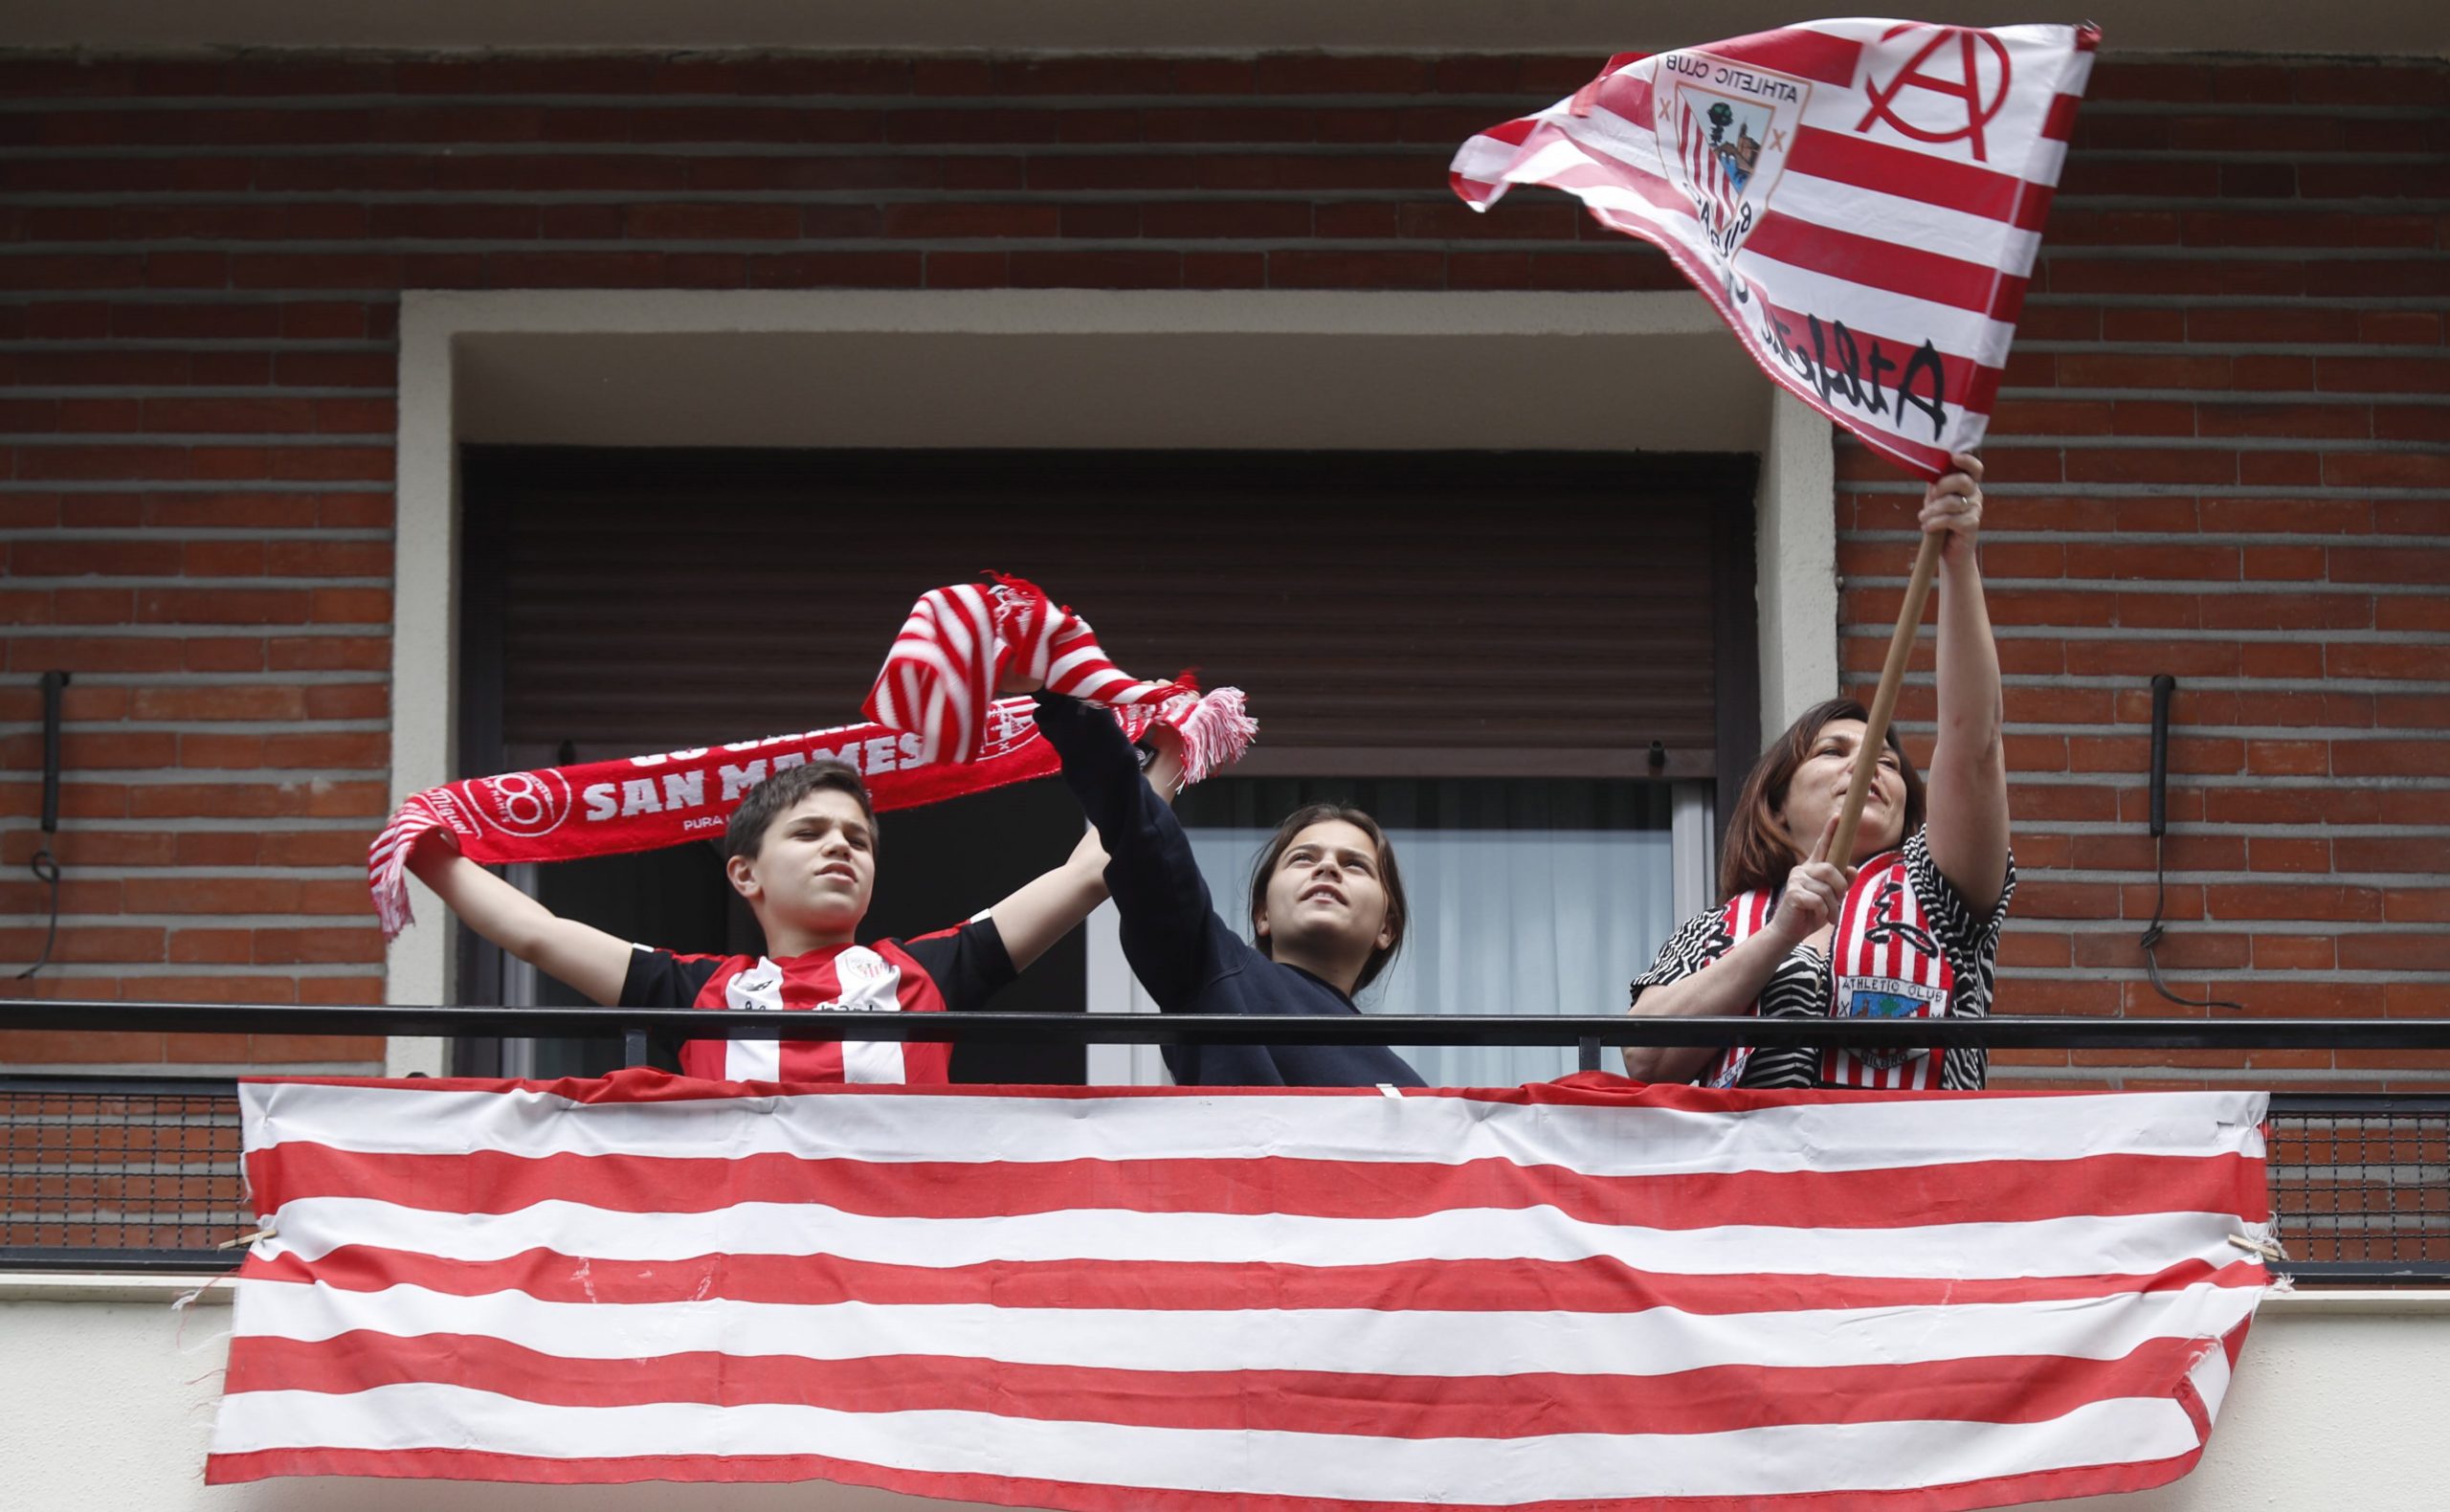 epa08370606 Athletic Bilbao supporters are seen at their balcony in Bilbao, Basque Country, Spain on 18 April 2020, when the King's Cup Final match between Athletic Bilbao and Real Sociedad should have taken place in Sevilla, but due to coronavirus has been postponed to an unknown day.  EPA/Luis Tejido